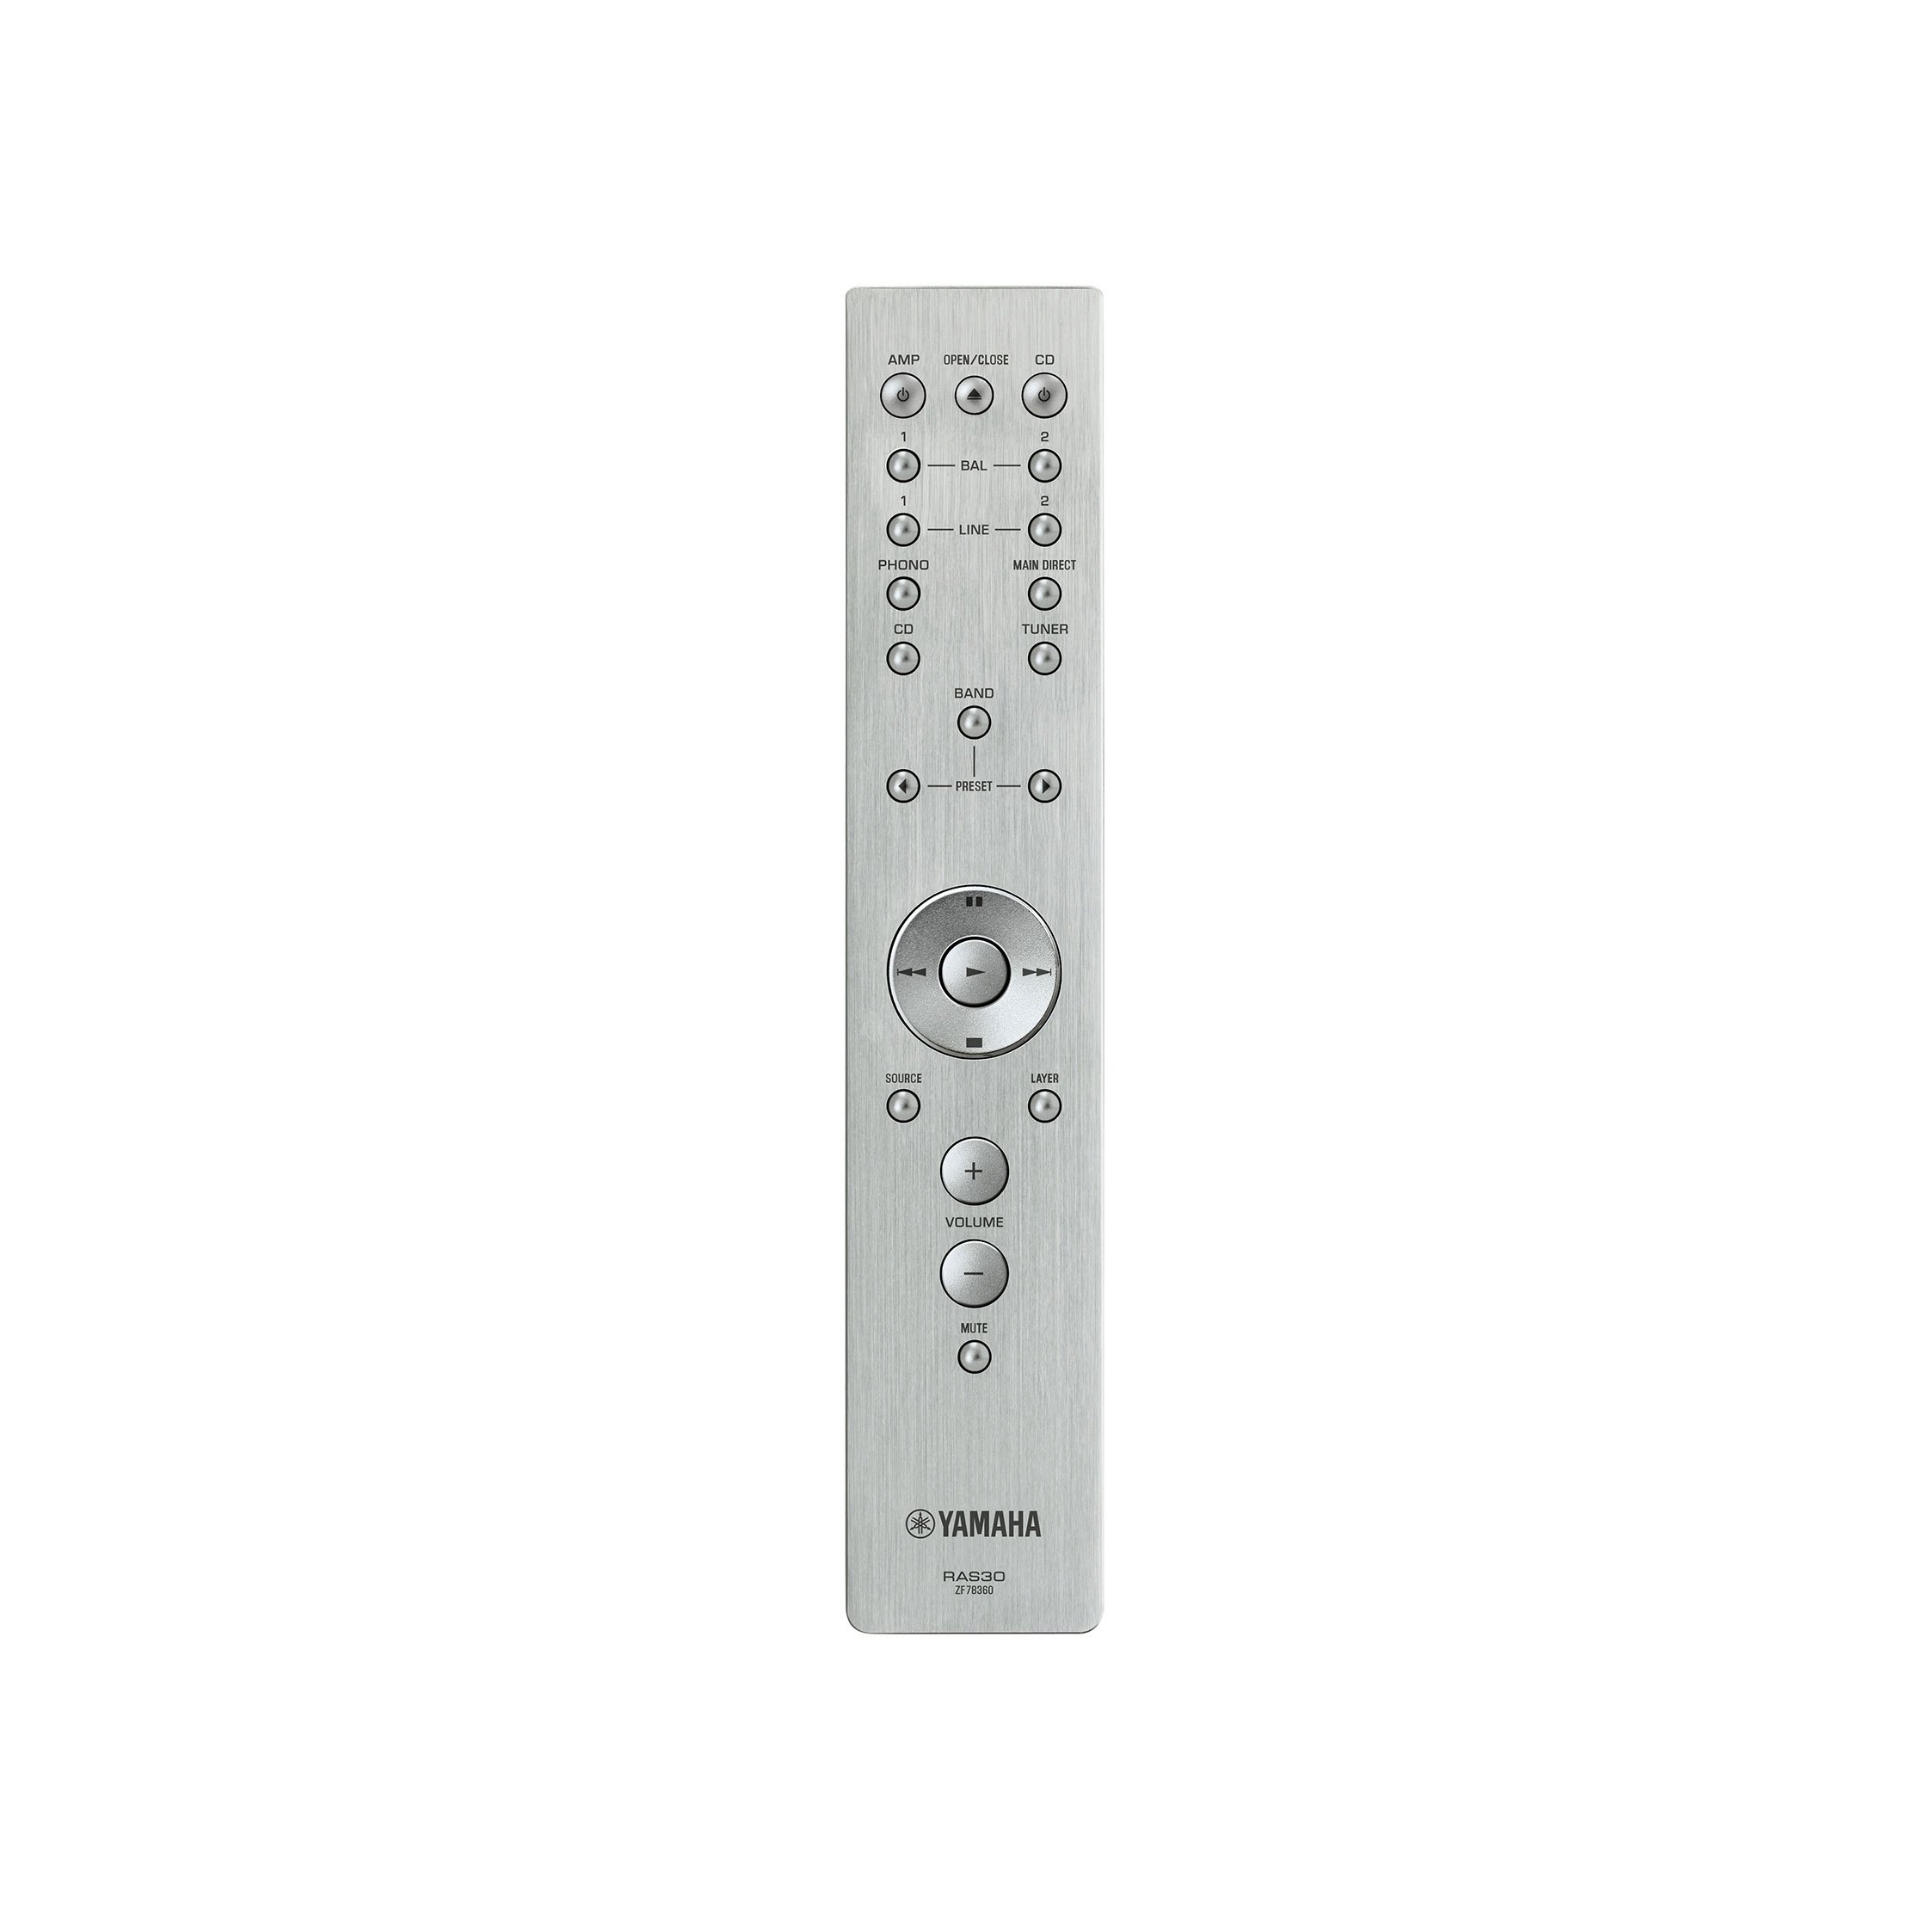 Remote control with simple design and superior texture